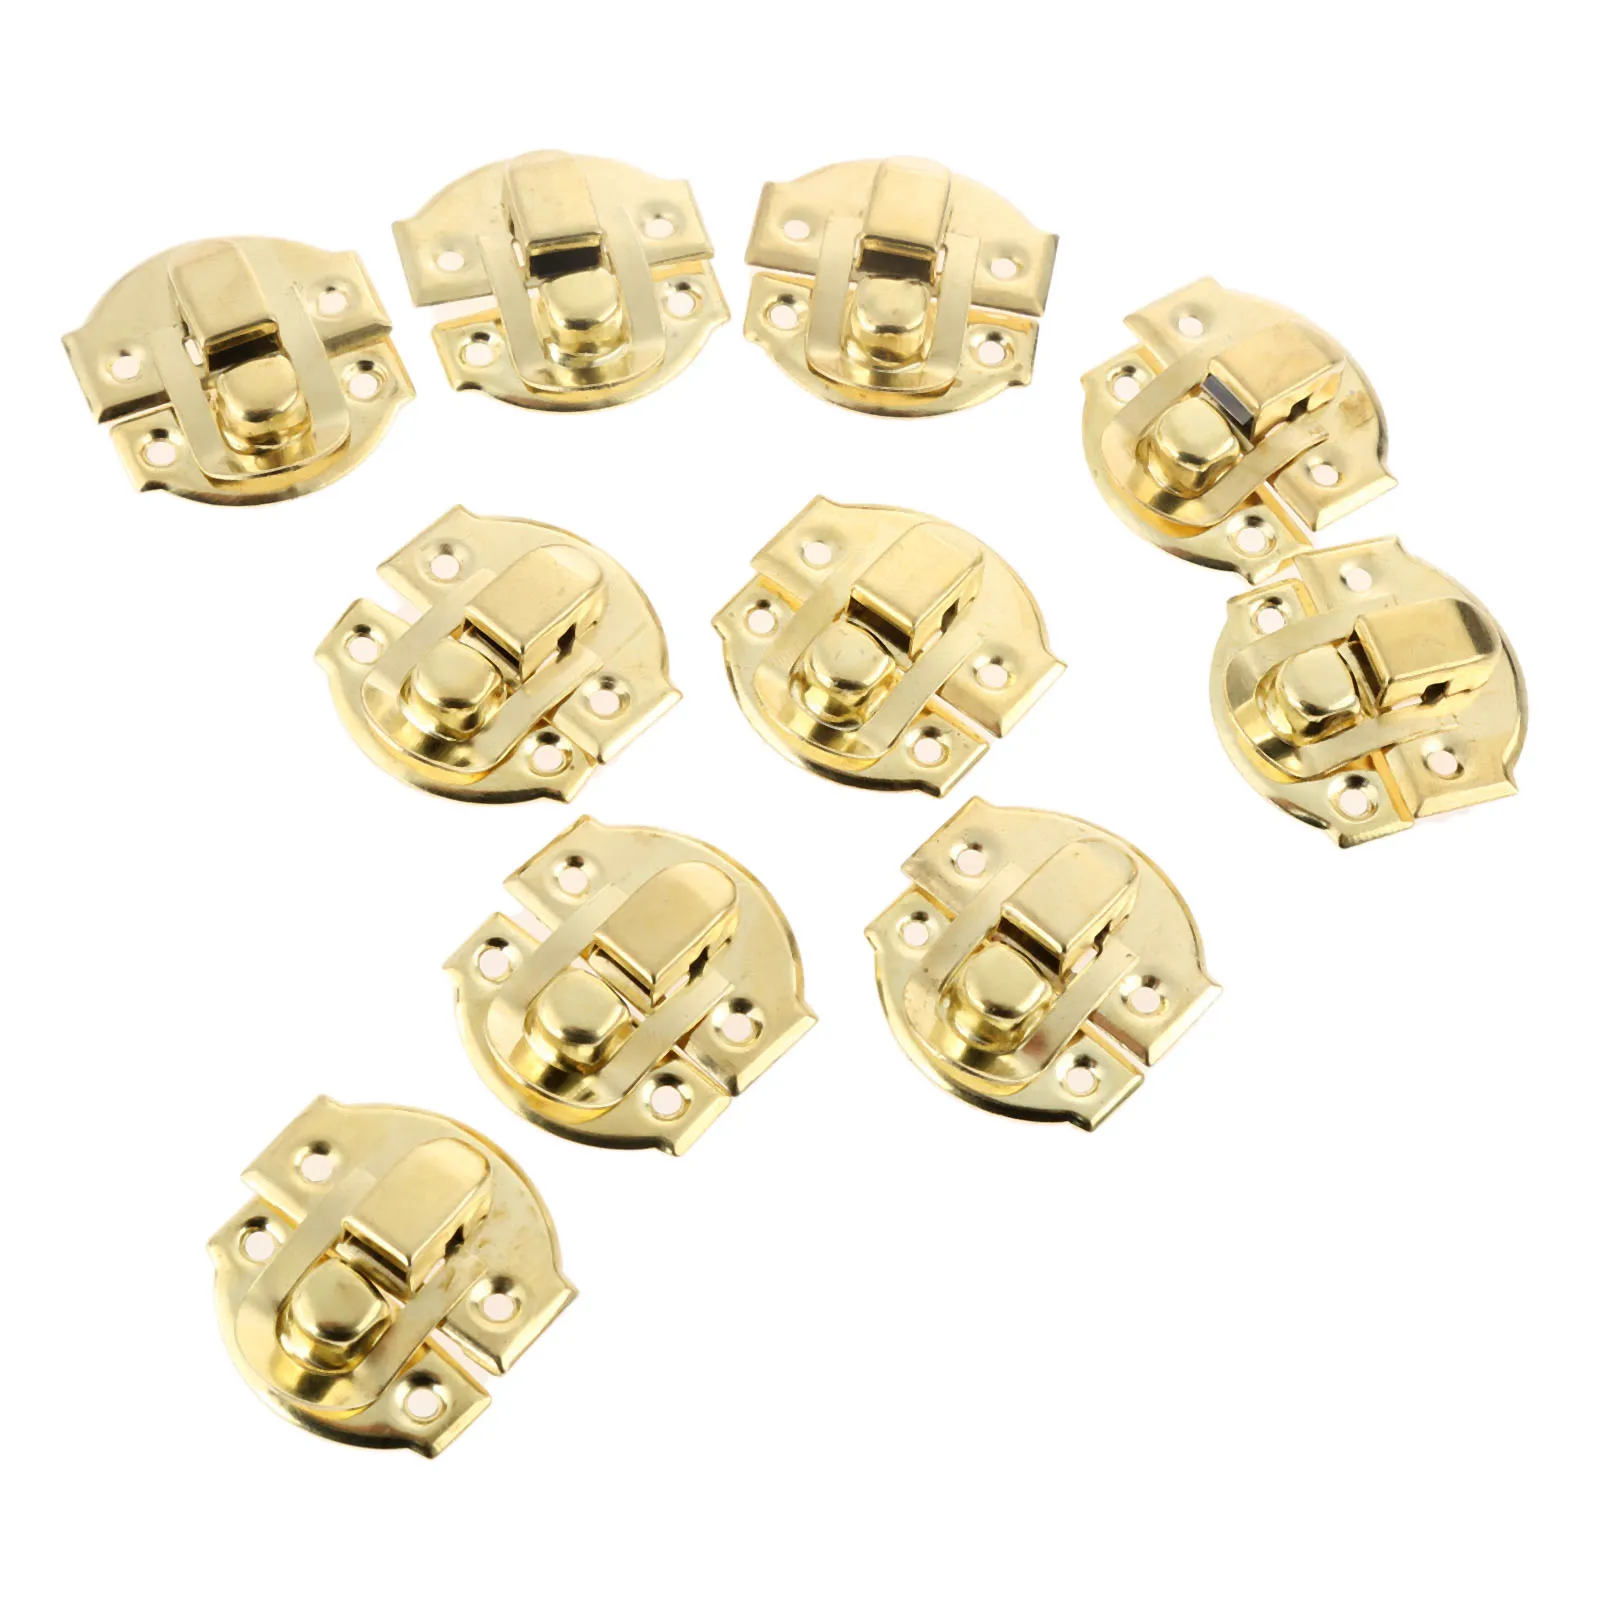 10Pcs Antique Gold Box Hasps Iron Lock Catch Latches for Jewelry Chest Box Suitcase Buckle Clip Clasp Vintage Hardware 27*29mm